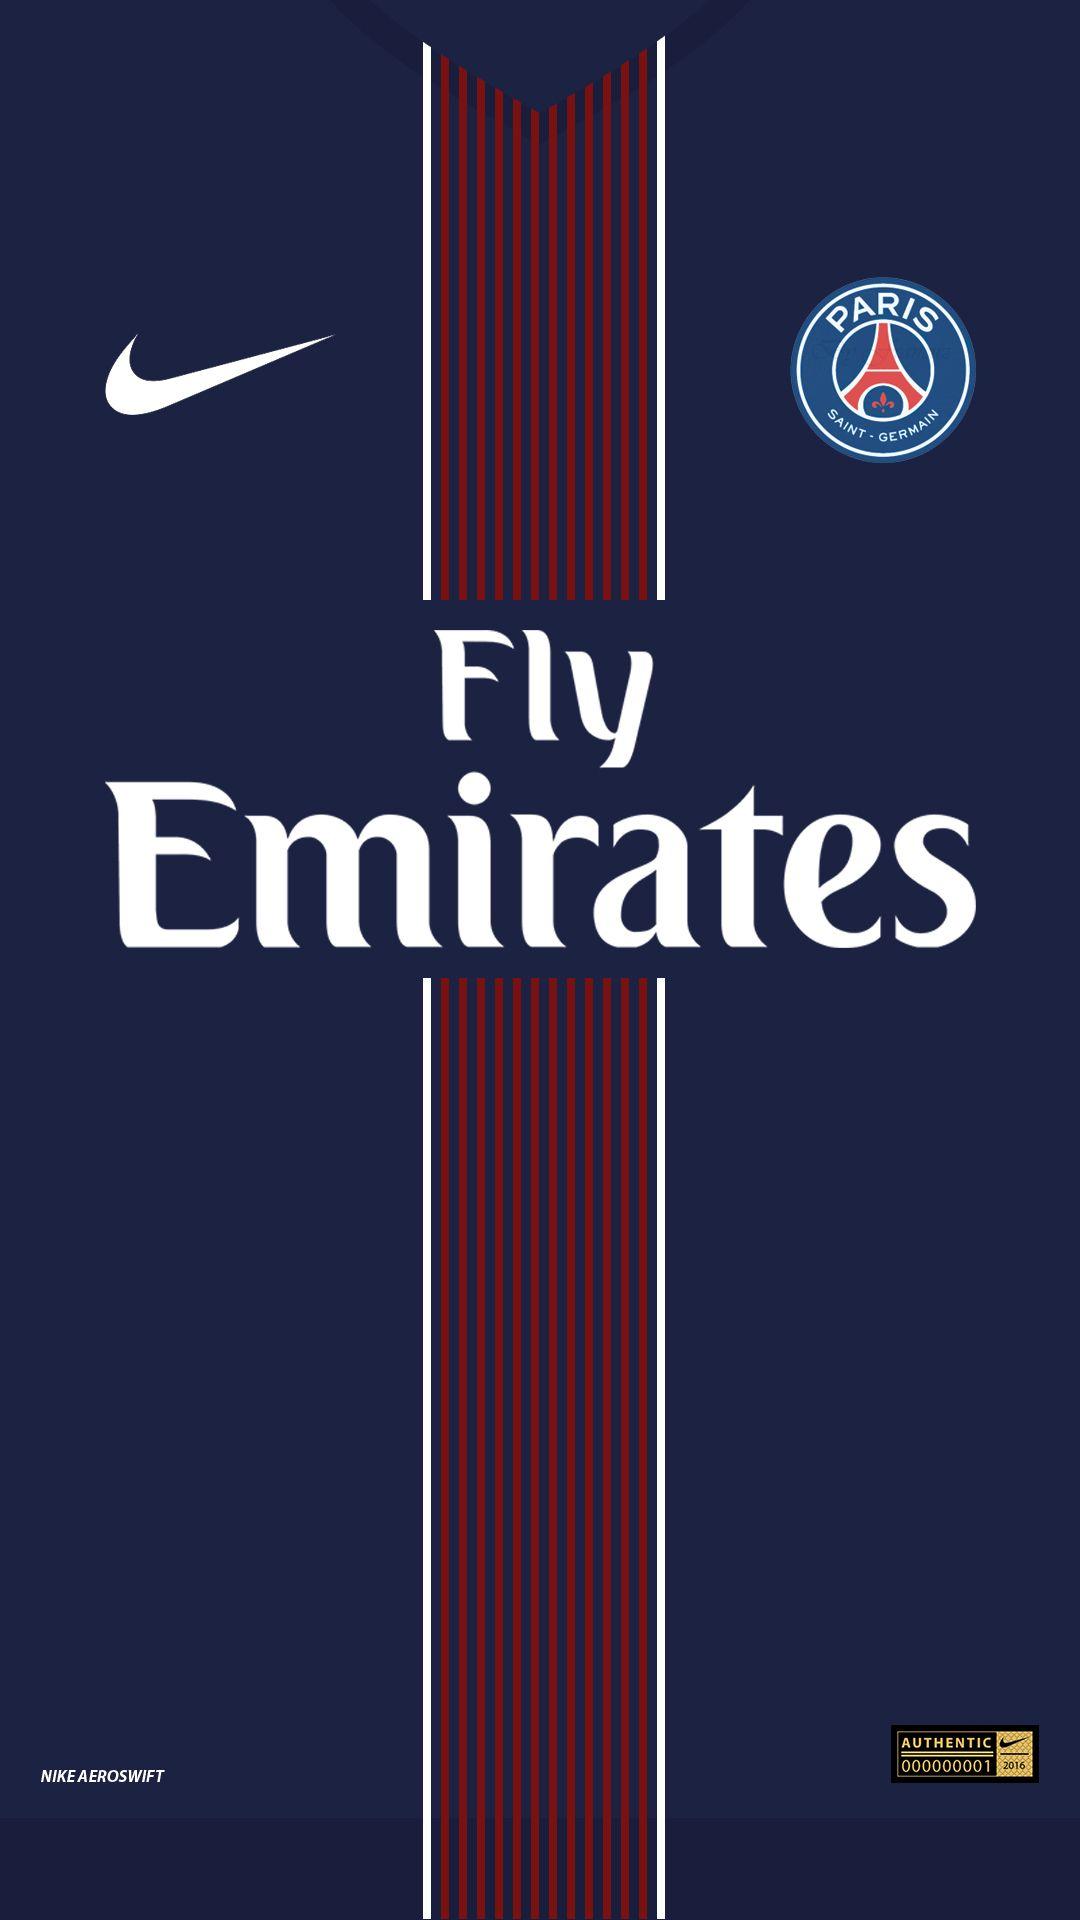 Brand New PSG HOME Jersey 2016 17 Coming Out On May 23th 2016